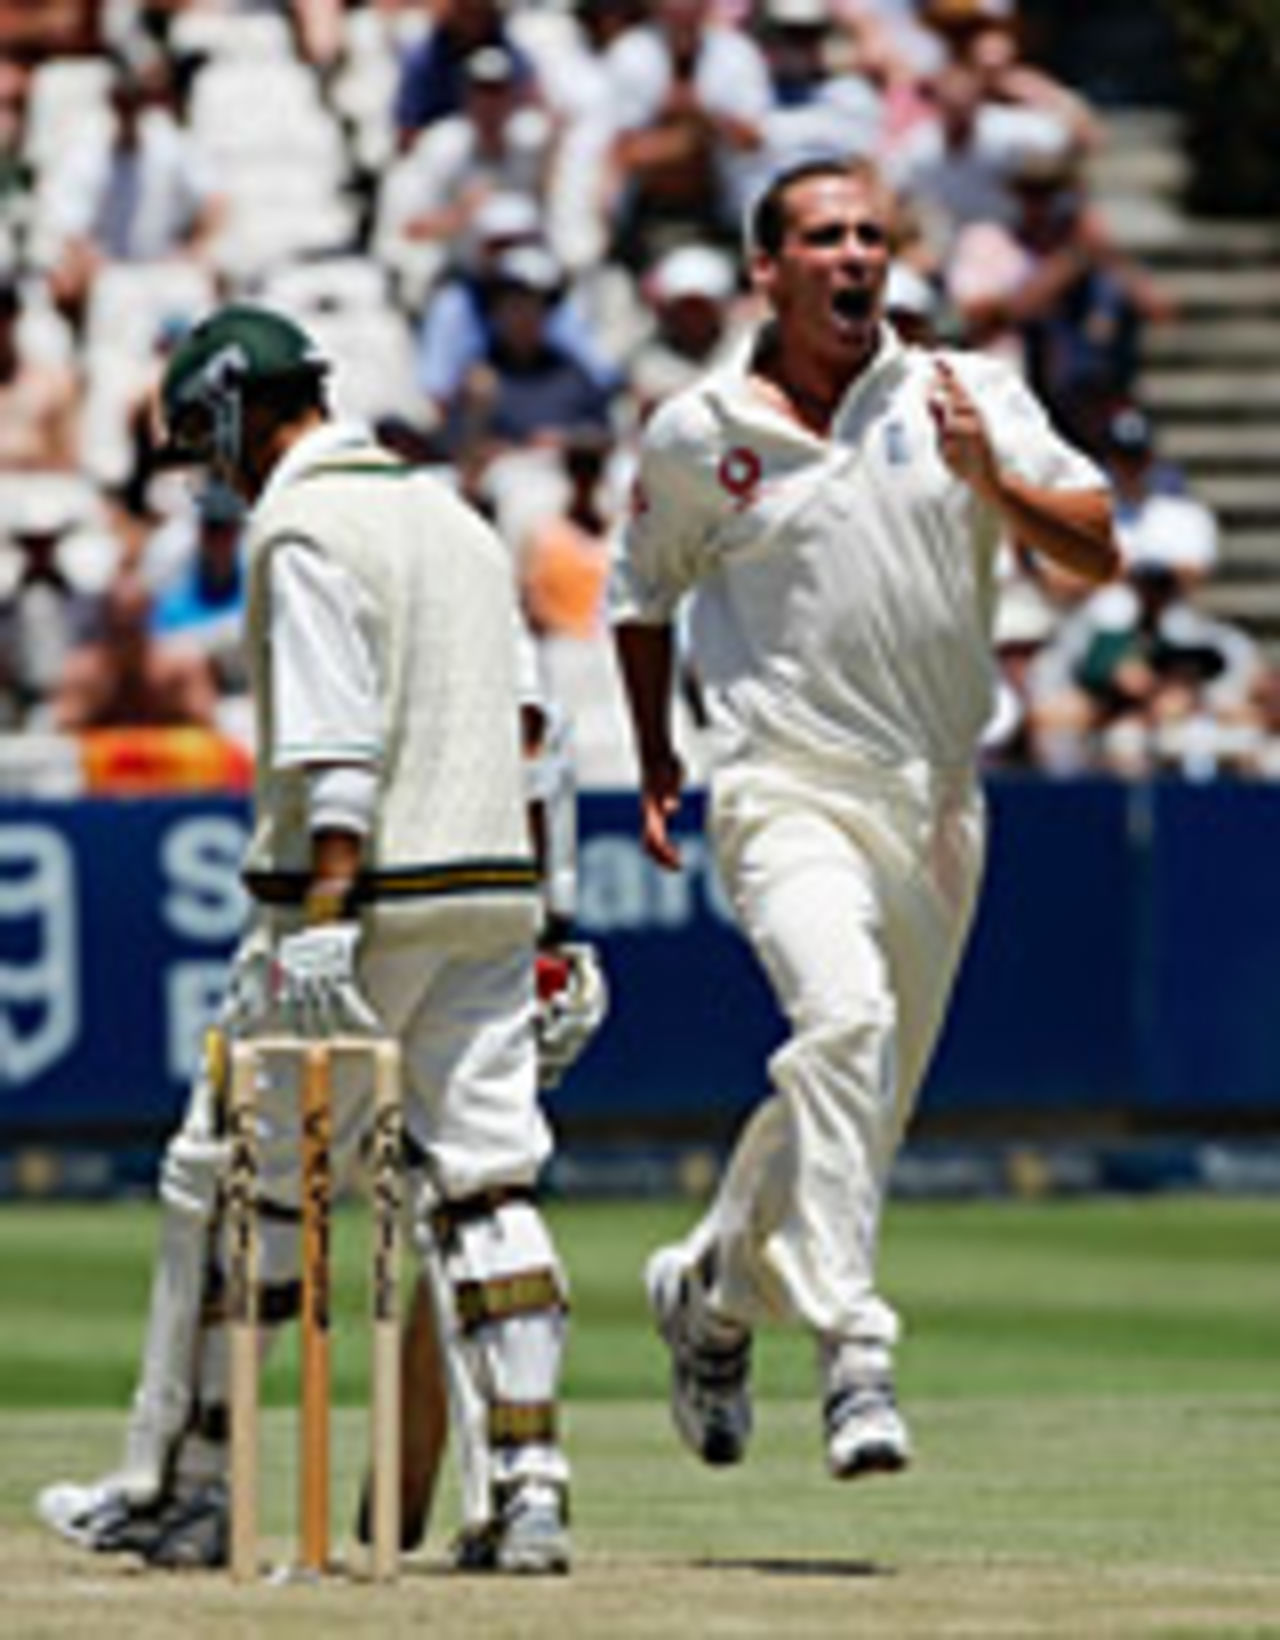 Simon Jones celebrates Jacques Rudolph's wicket, South Africa v England, 3rd Test, Cape Town, 1st day, January 2, 2005